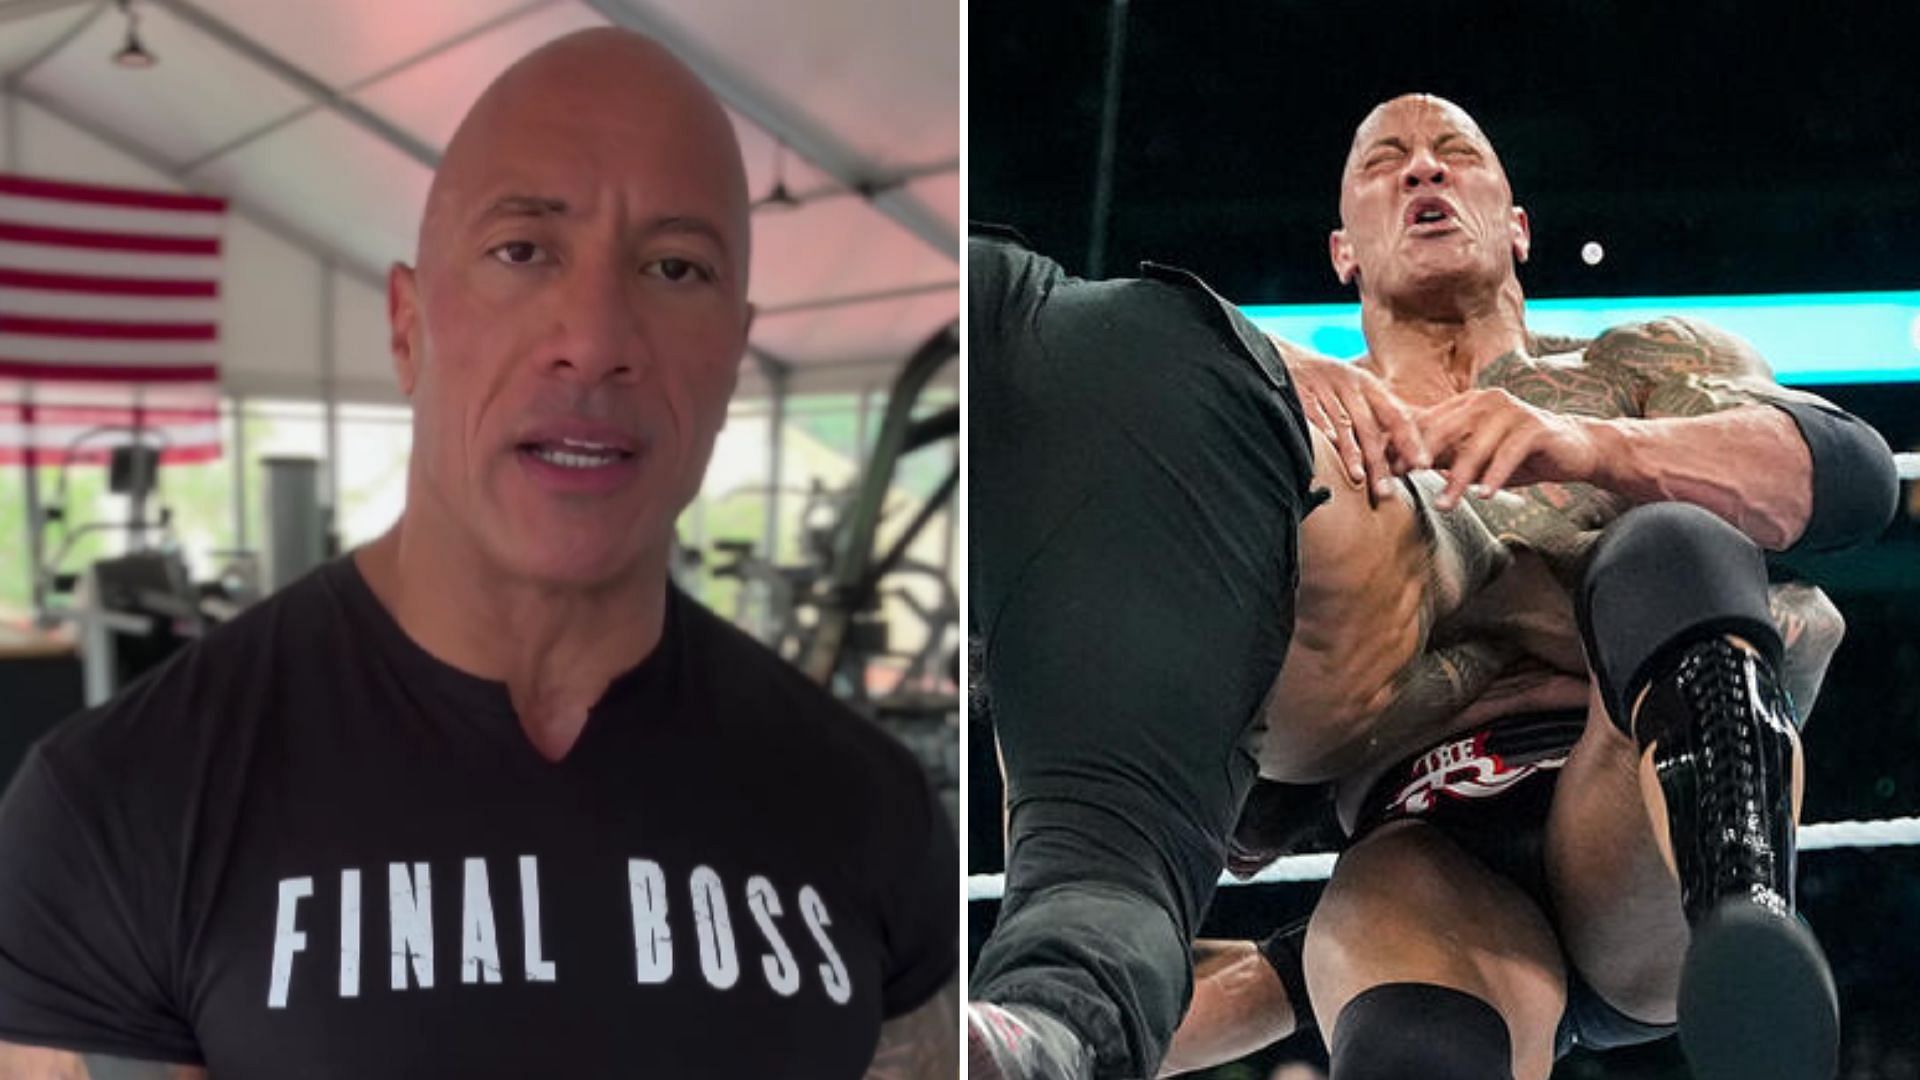 The Rock is a 17-time WWE champion [Image credits: star